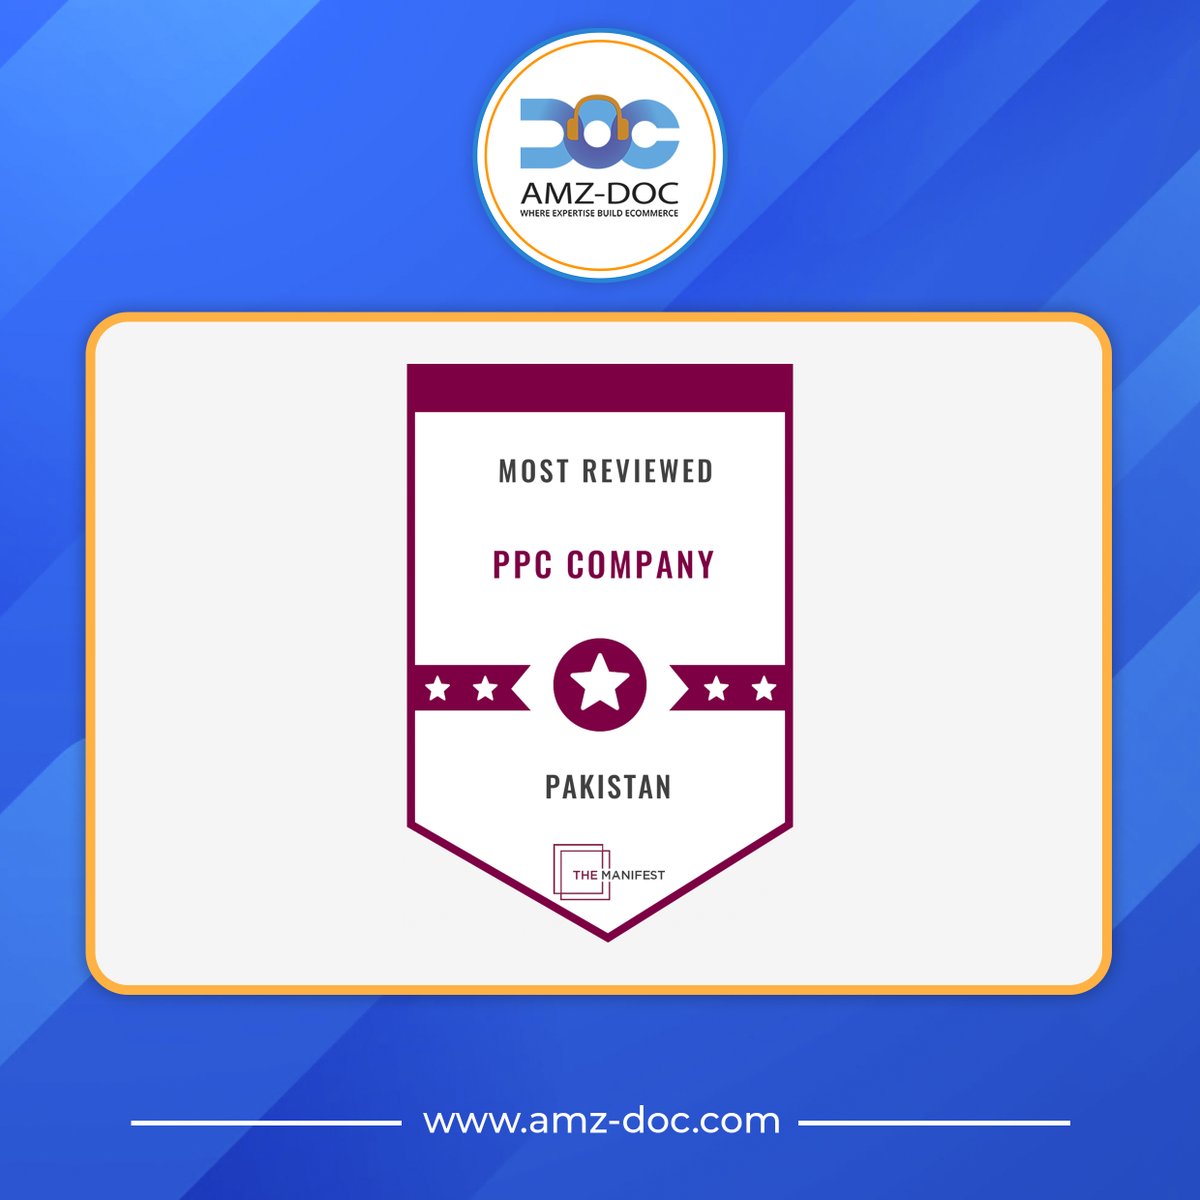 The Manifest Crowns AMZ DOC INC. as one of the Most-Reviewed PPC Agencies in Pakistan

#TMLeader #PPCAgency #DigitalMarketing #AMZDOCINC #PakistanPPC #eCommerce #TheManifest #DigitalStrategy #OnlineBusiness #VirtualAssistant #SEO #PPC #SMM #AmazonSelling